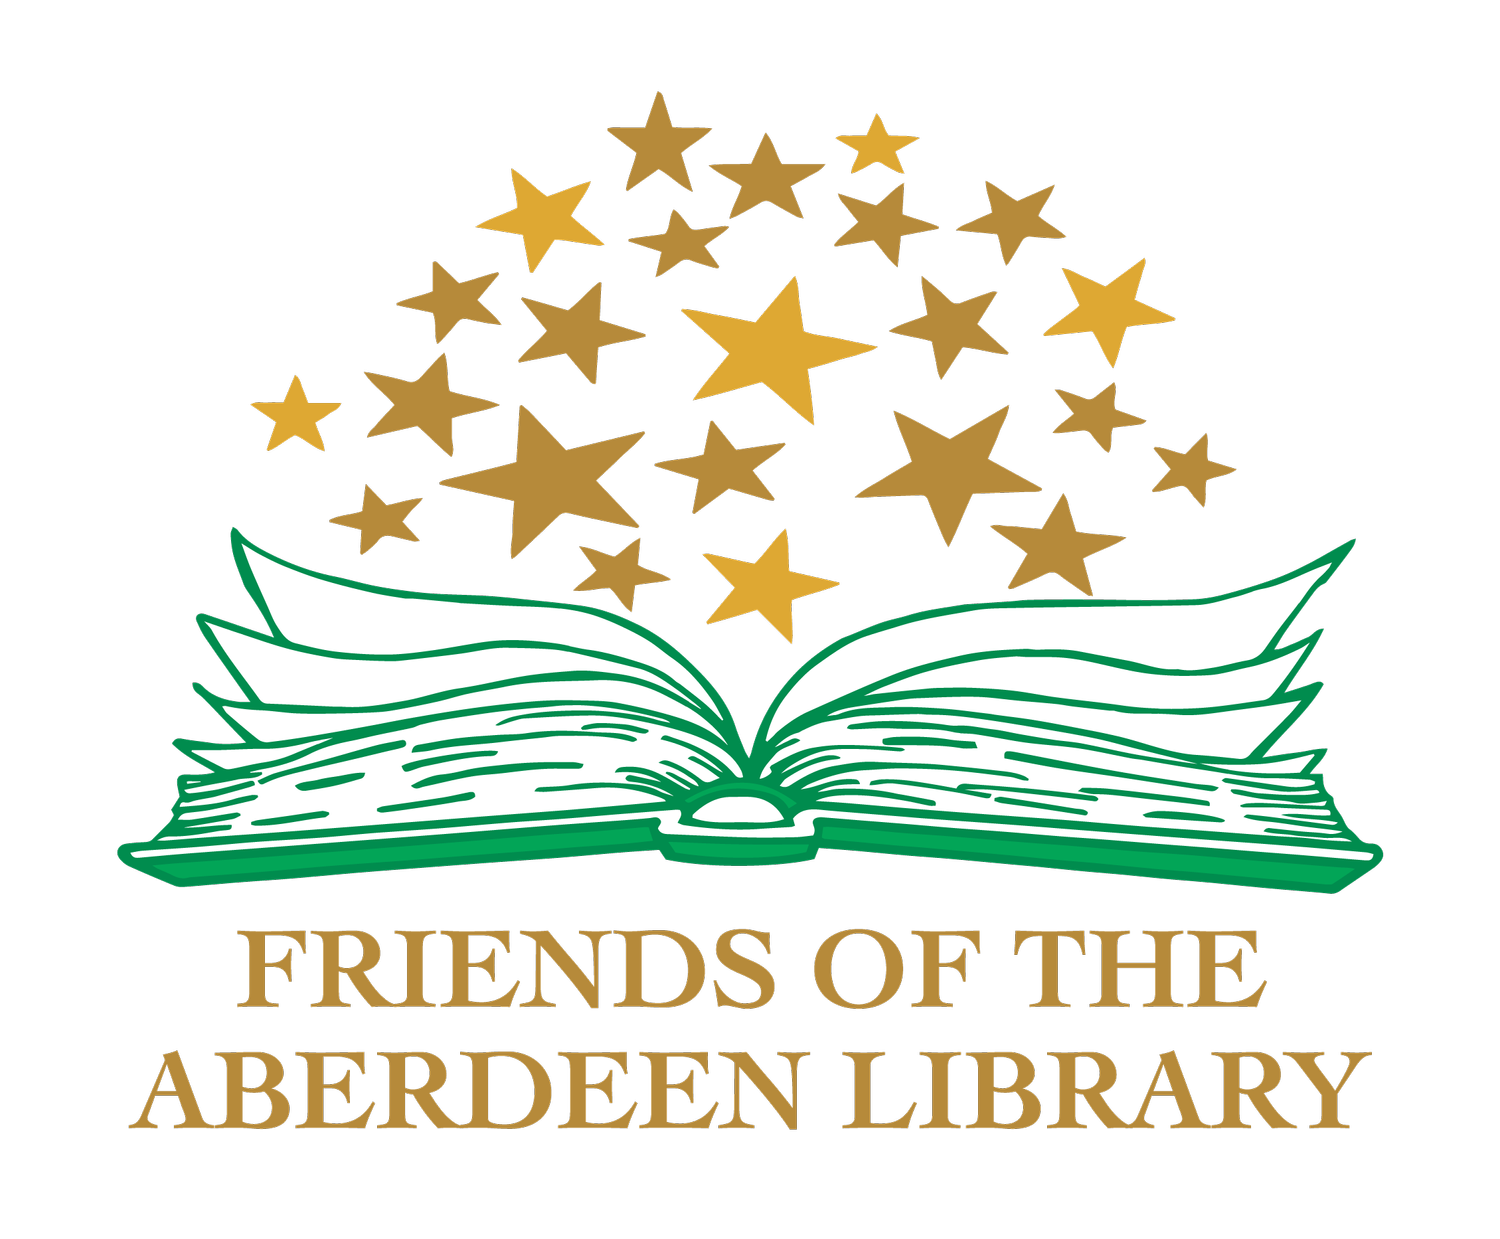 The Friends of the Aberdeen Library